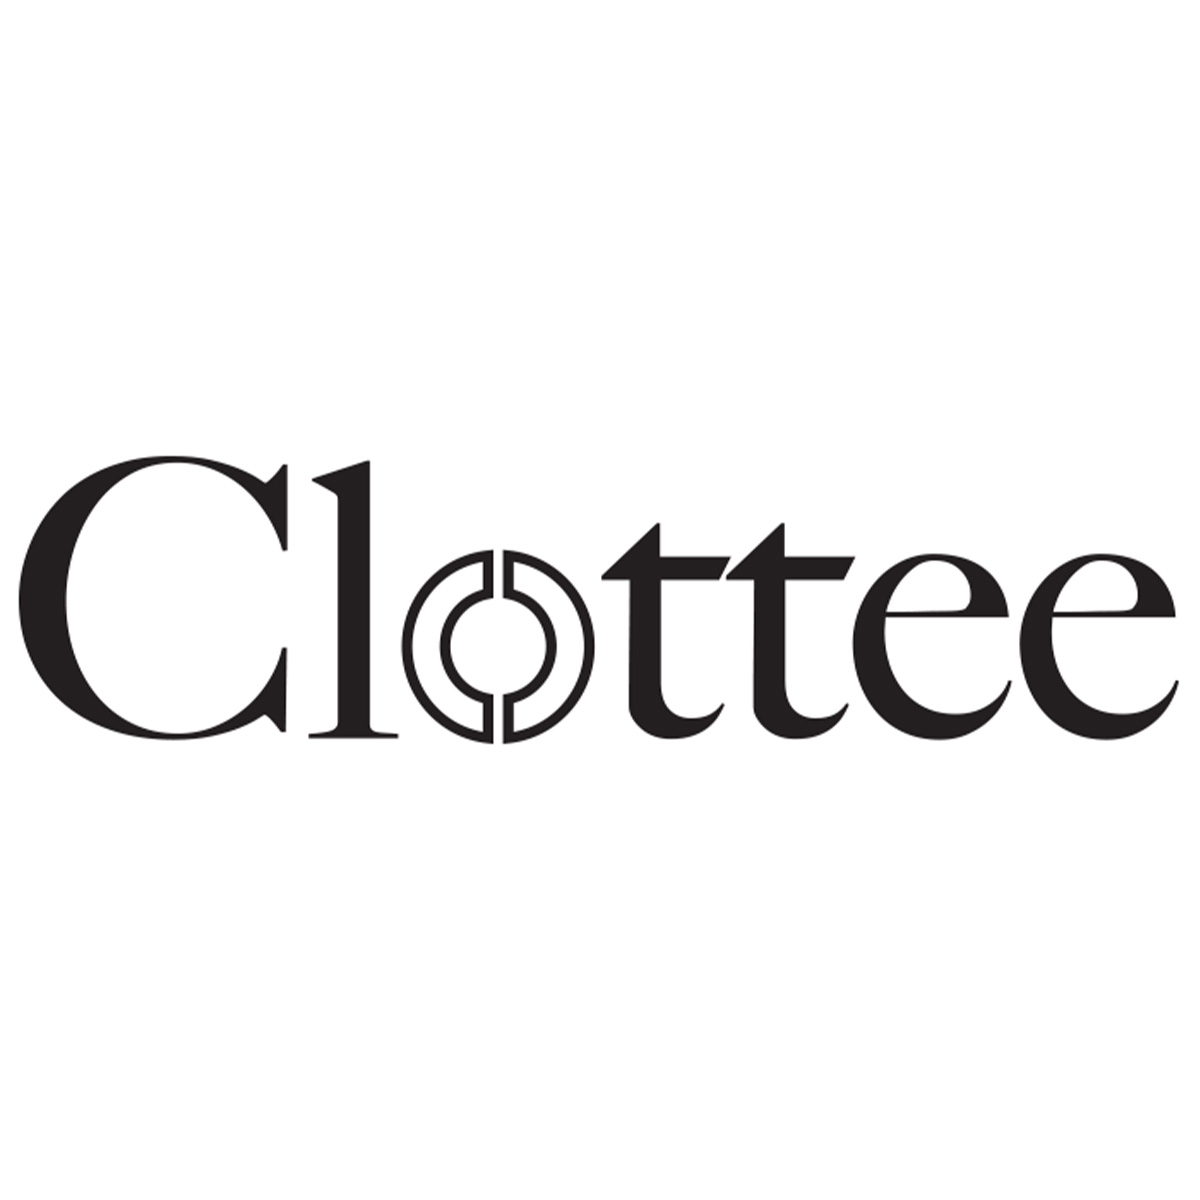 CLOTTEE by CLOT | MFC STORE OFFICIAL ONLINESTORE